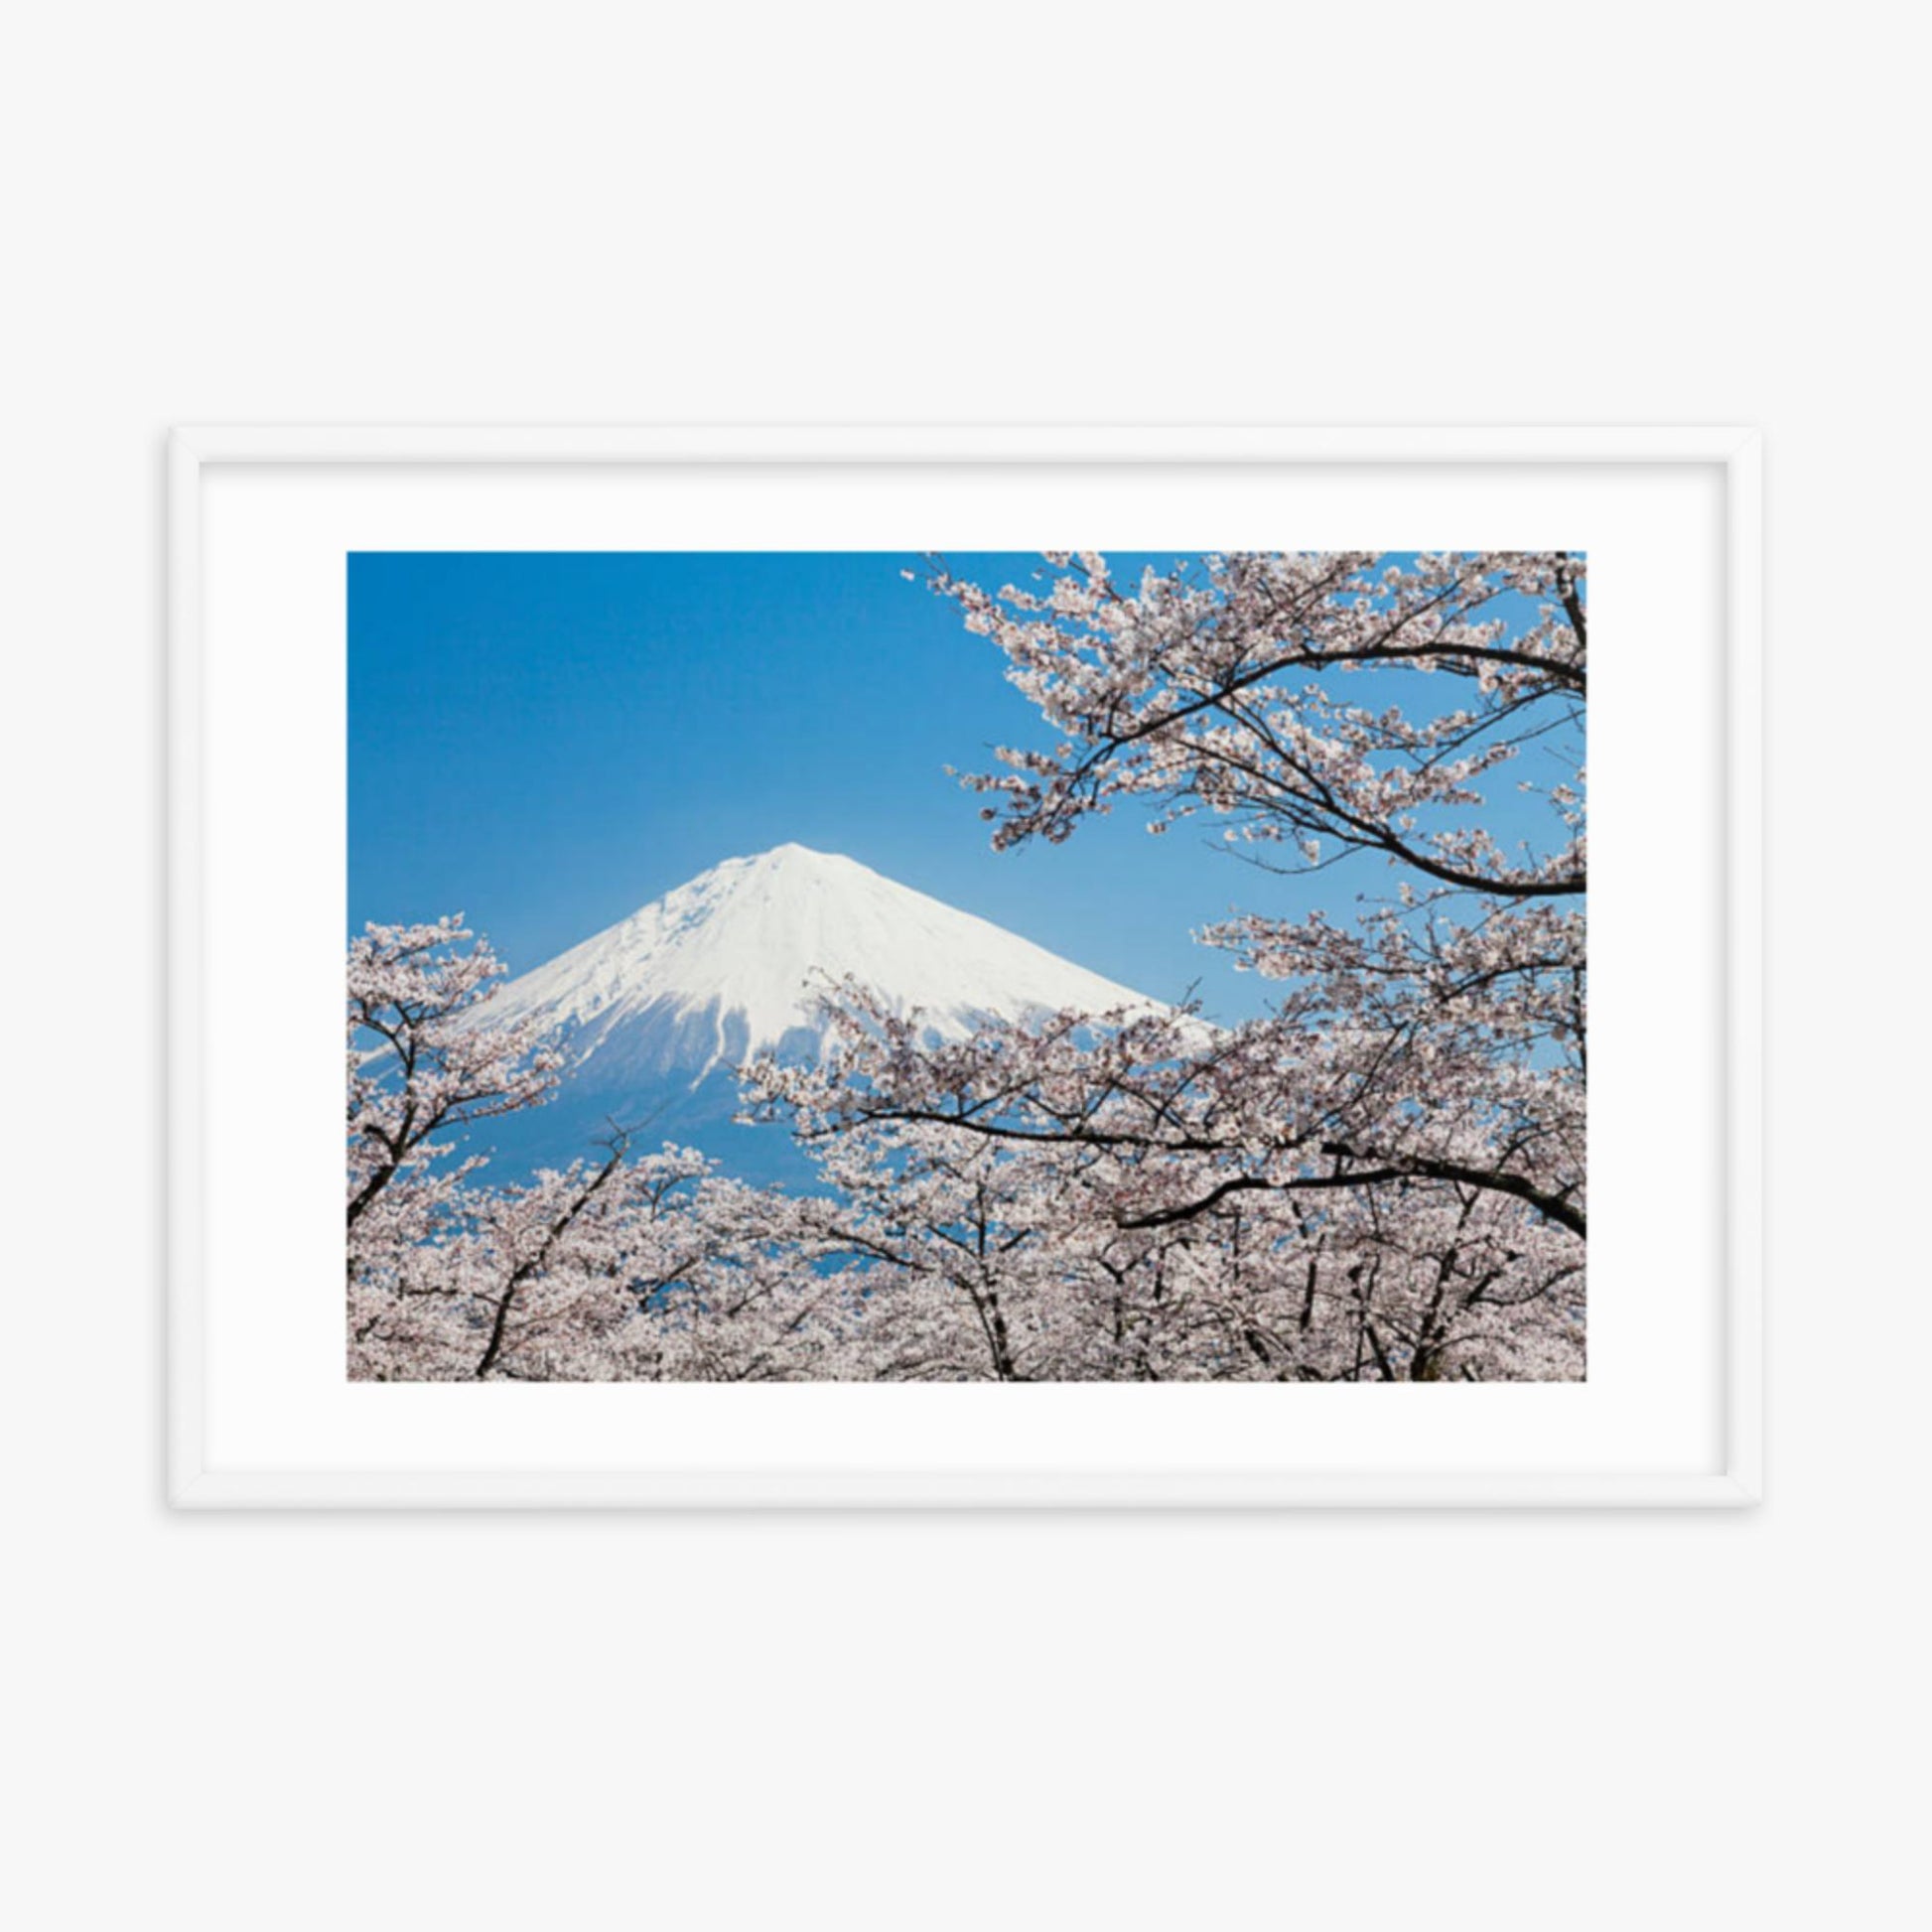 Mount Fuji & Cherry Blossoms 24x36 in Poster With White Frame